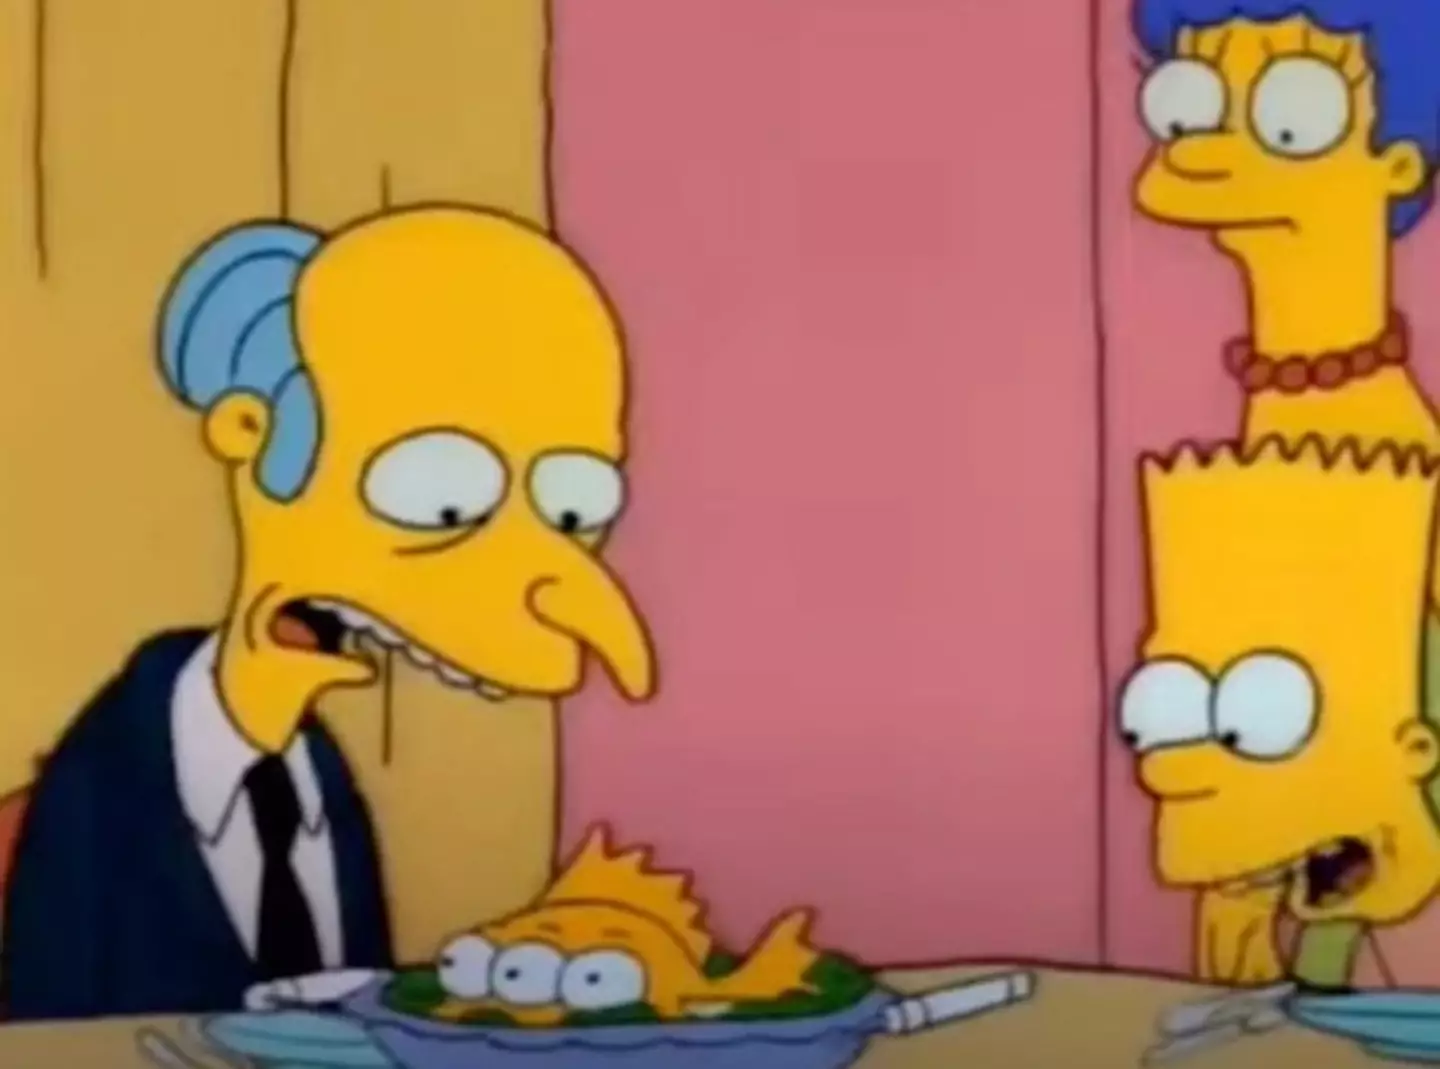 Mr. Burns is given a radioactive fish to eat.